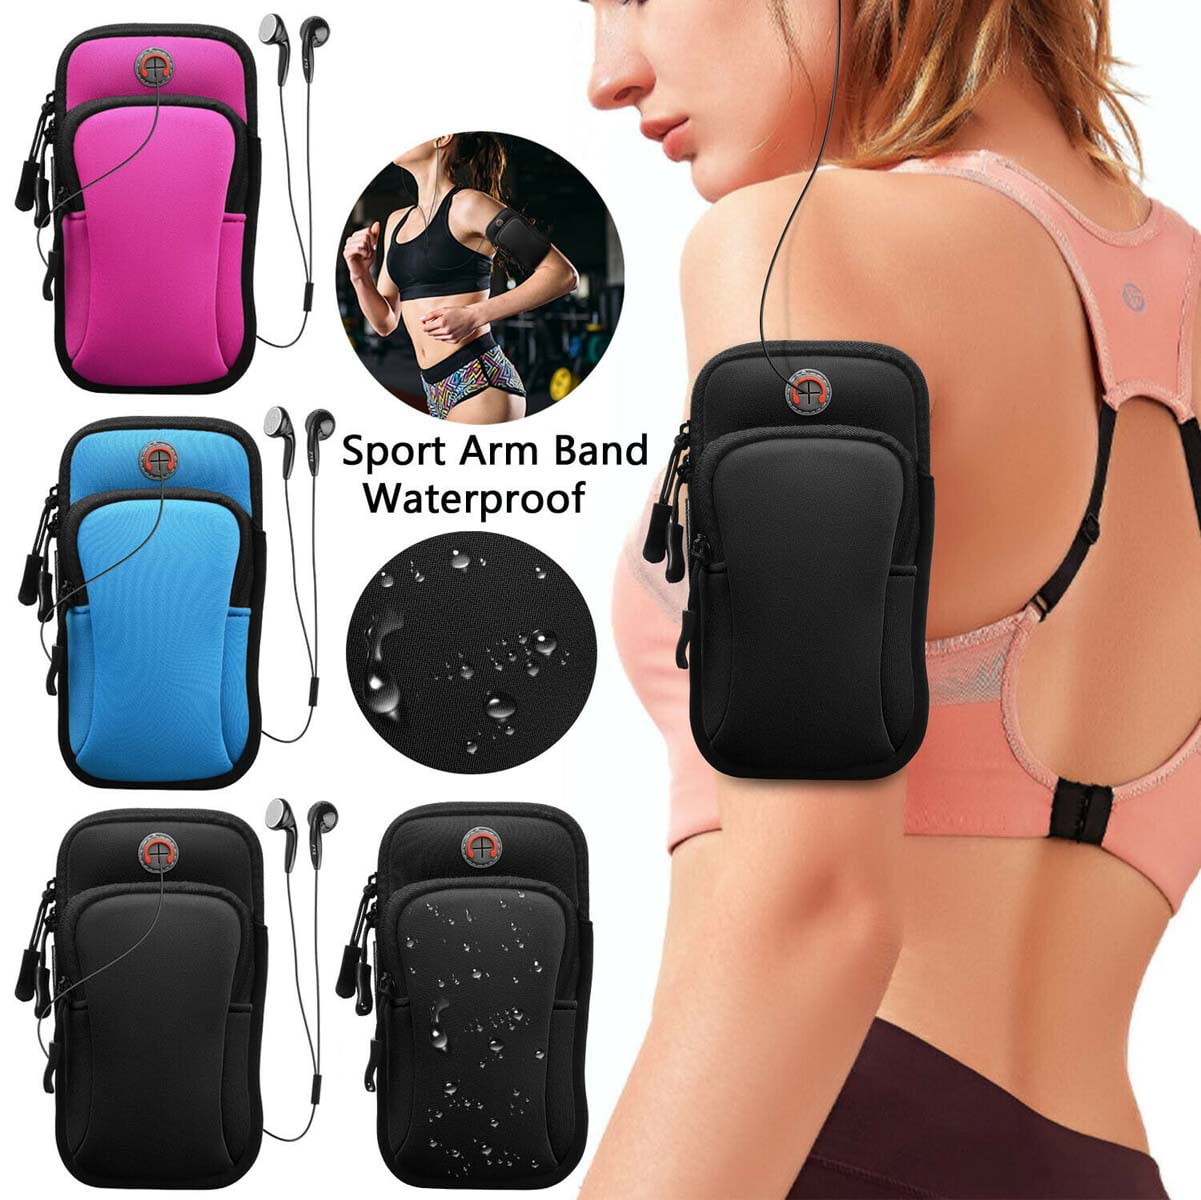 Sports Running Jogging Gym Arm Band Armband Case Holder for iPhone 6 Samsung S6 